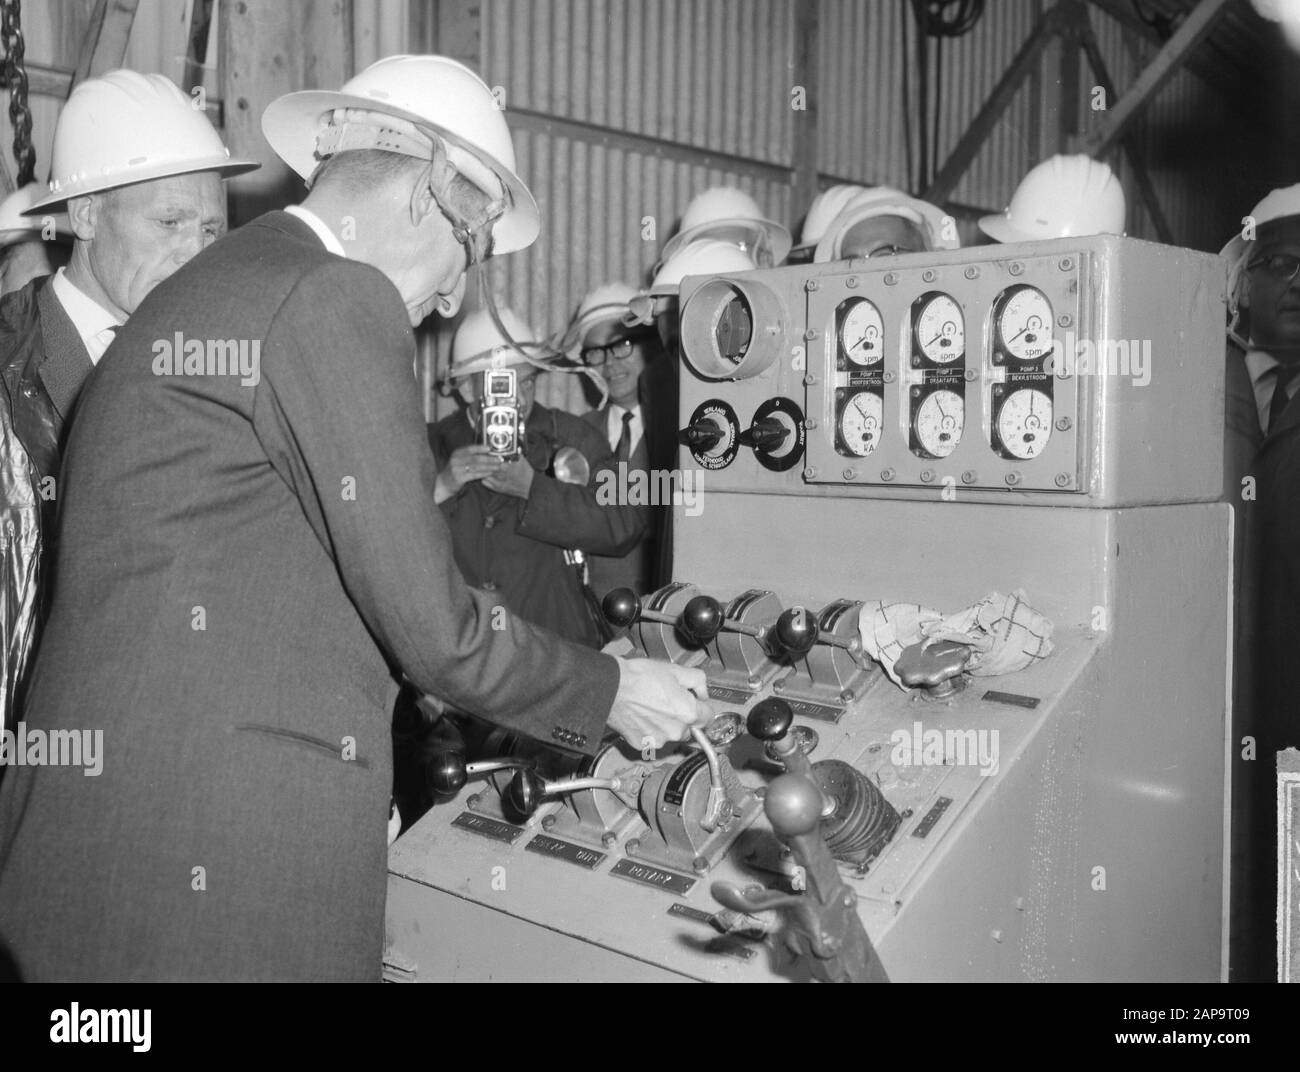 Natural gas field in Slochteren officially put into use mr. Fock and drs. de Pous during the commissioning of the tower Date: 25 July 1963 Location: Groningen, Slochteren Personal name: Drs. de Pous Stock Photo